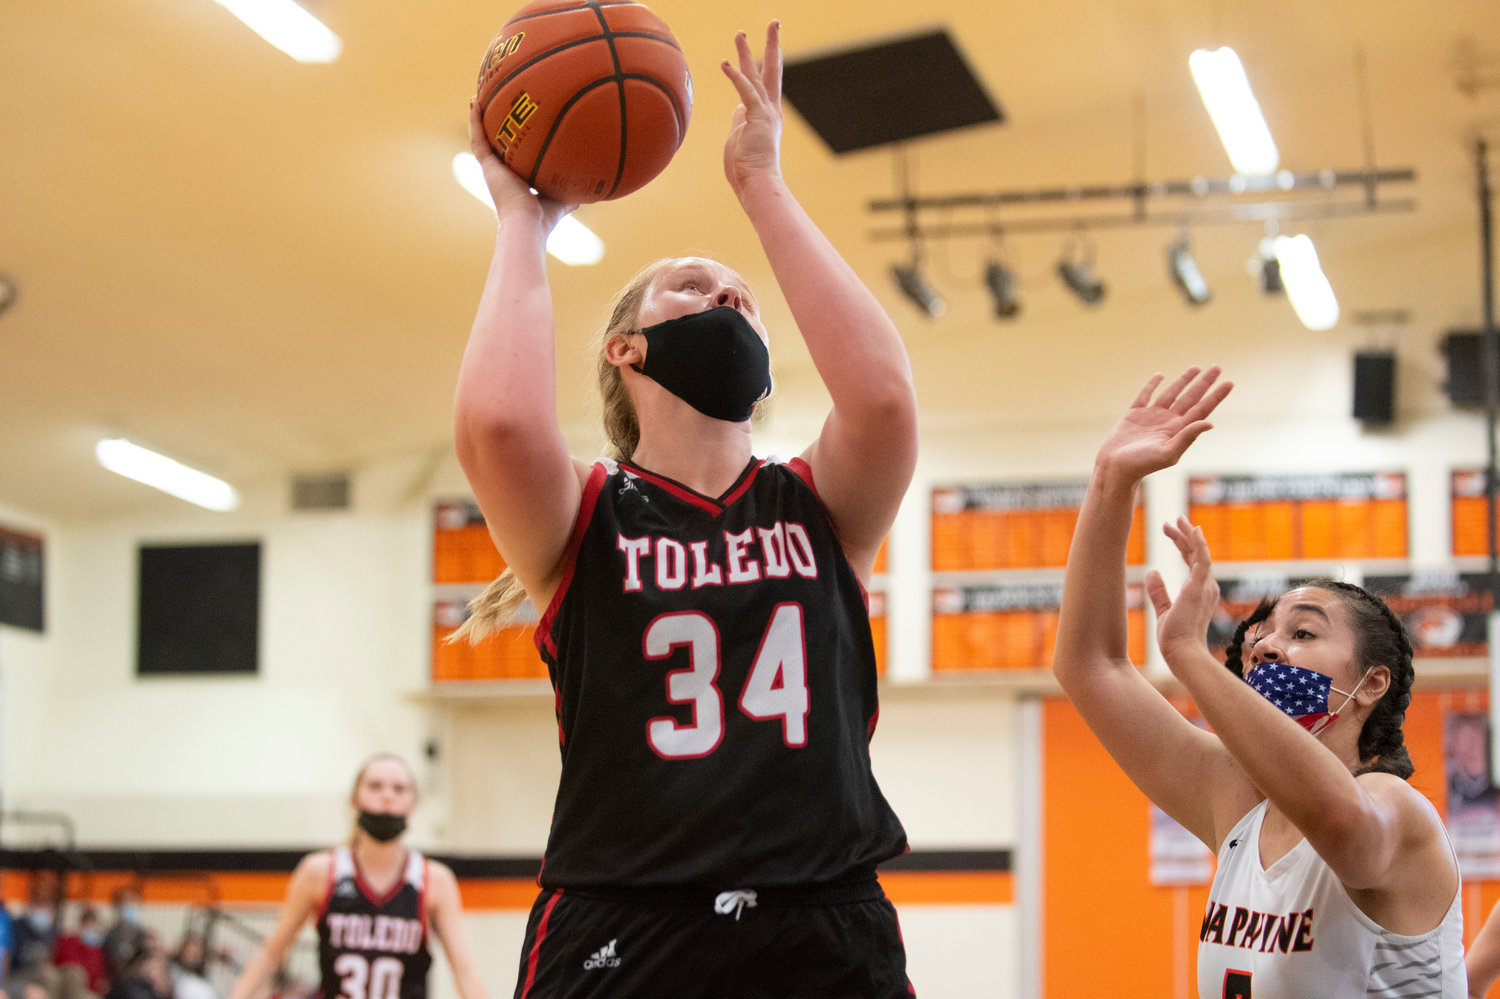 Toledo senior Stacie Spahr (34) goes up for two points in the paint against Napavine on Monday.